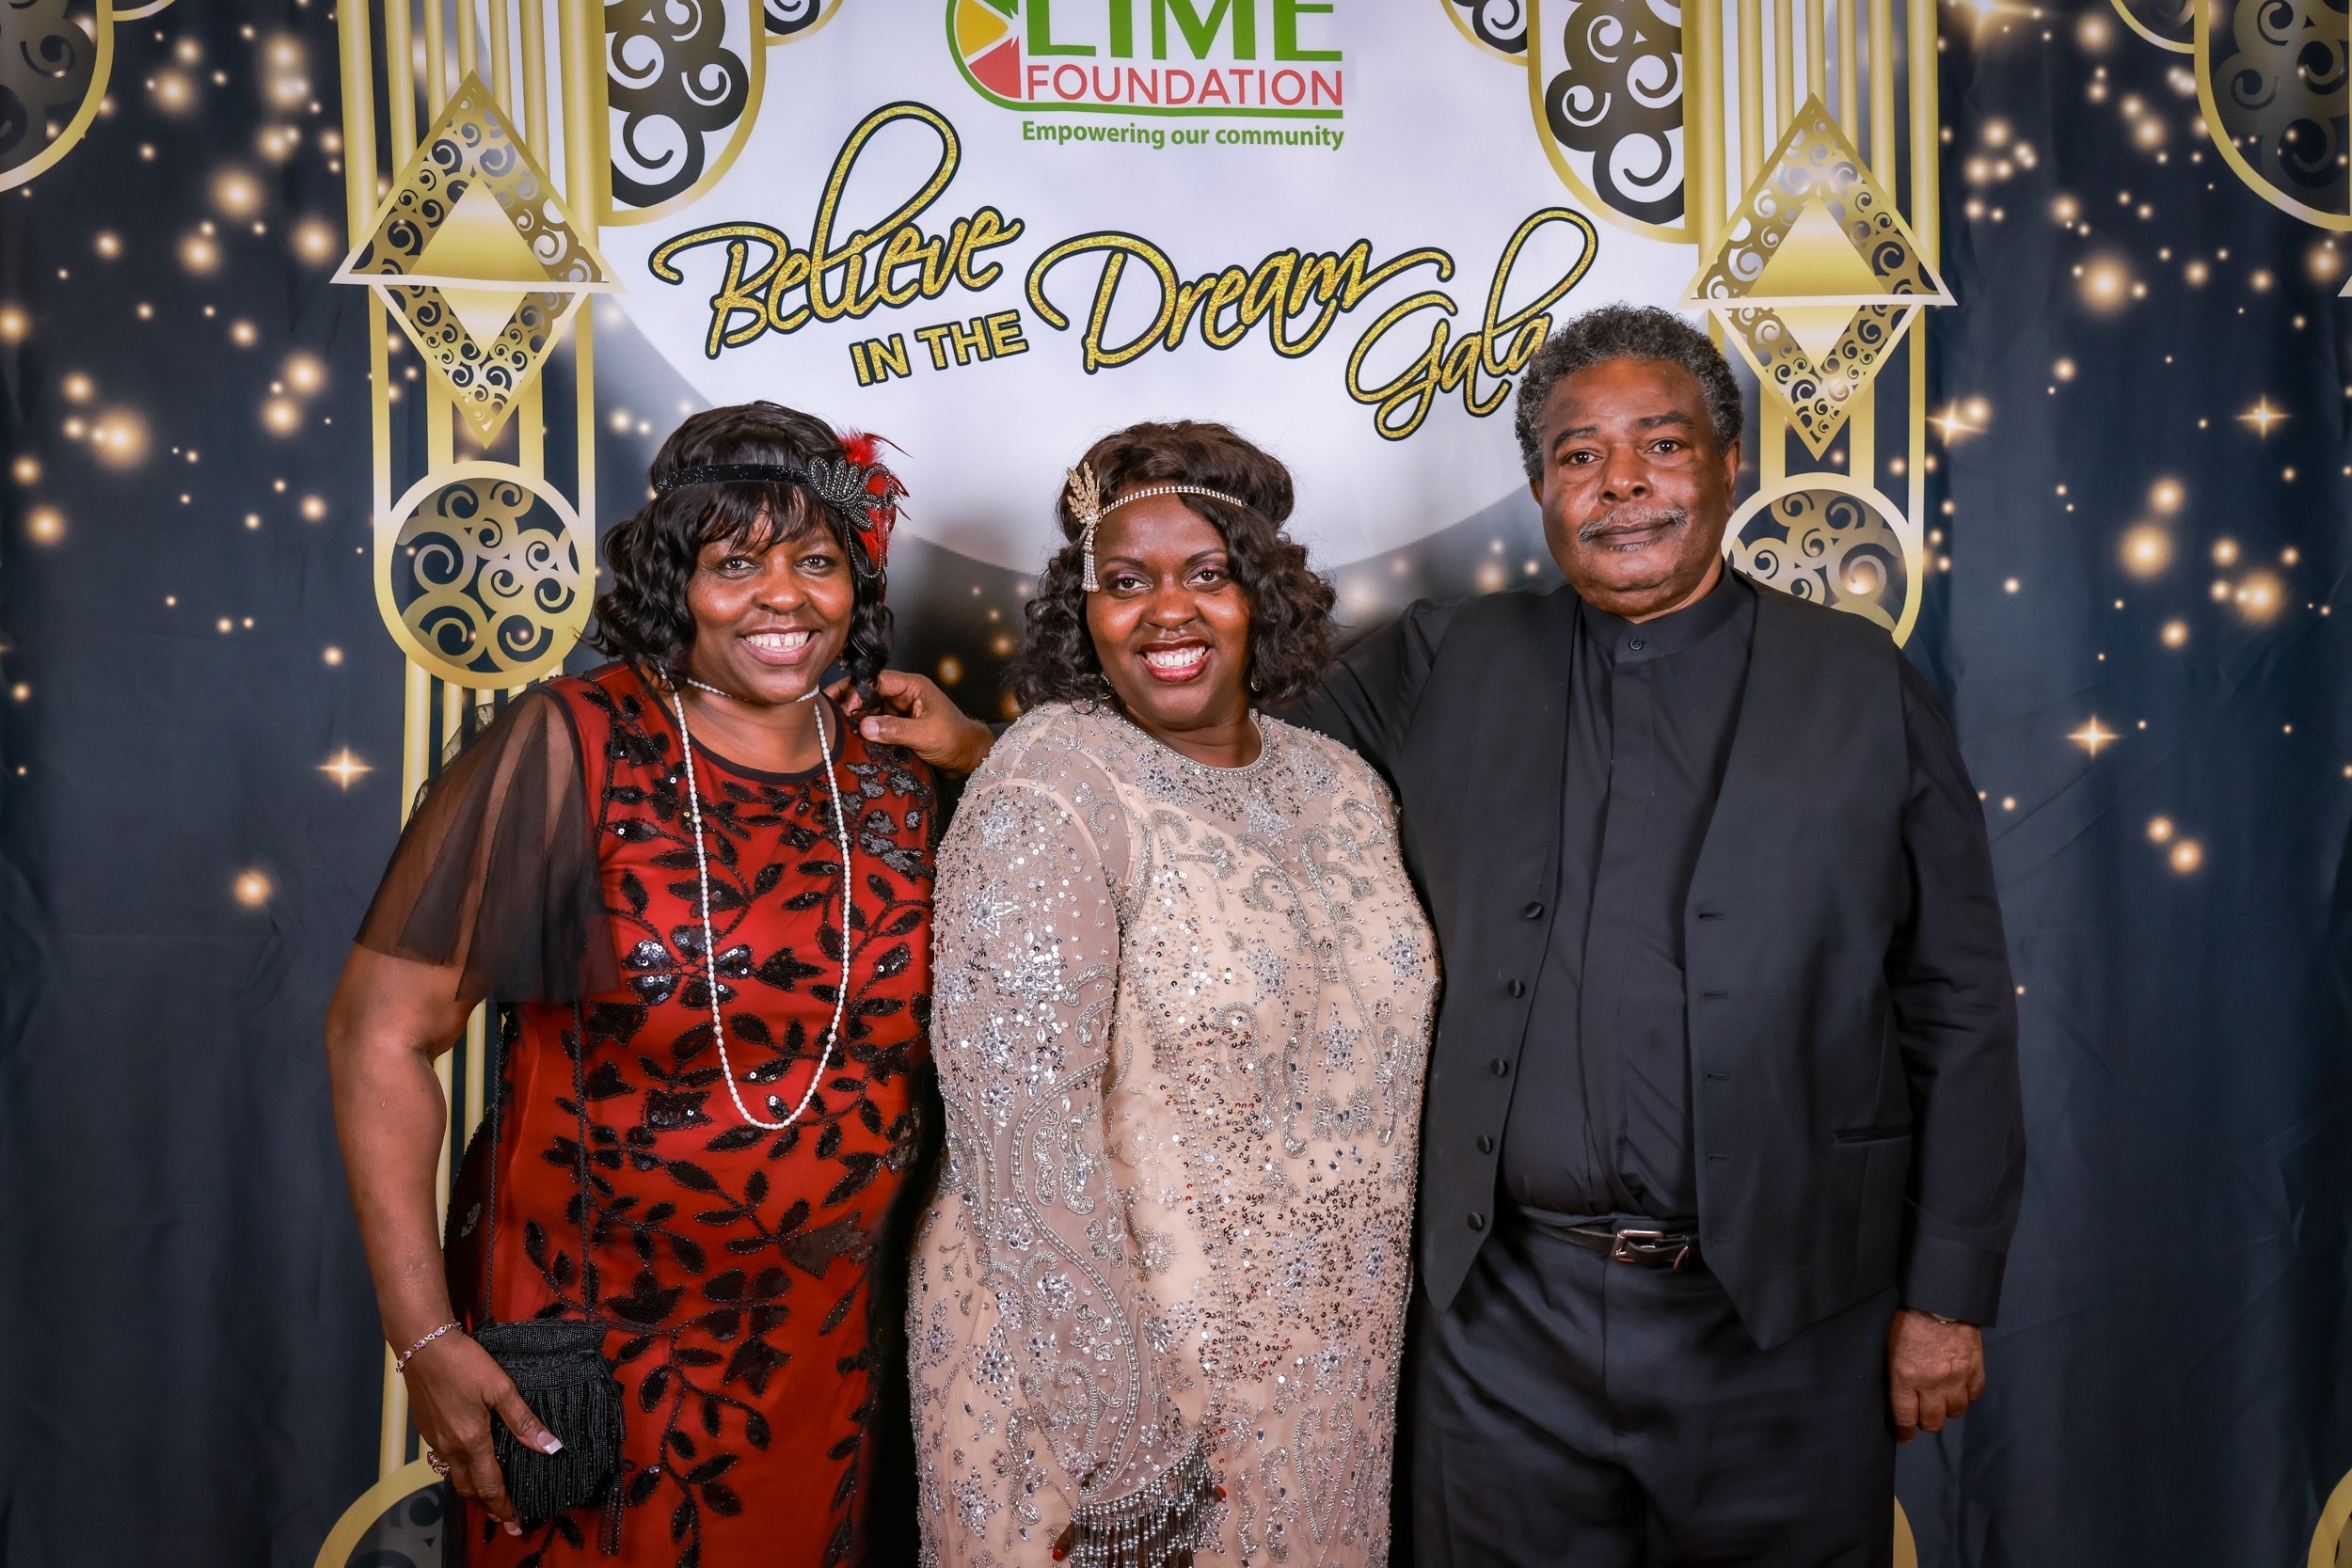 A group of people posing for a photo at a red carpet event hosted by The LIME Foundation of Santa Rosa.